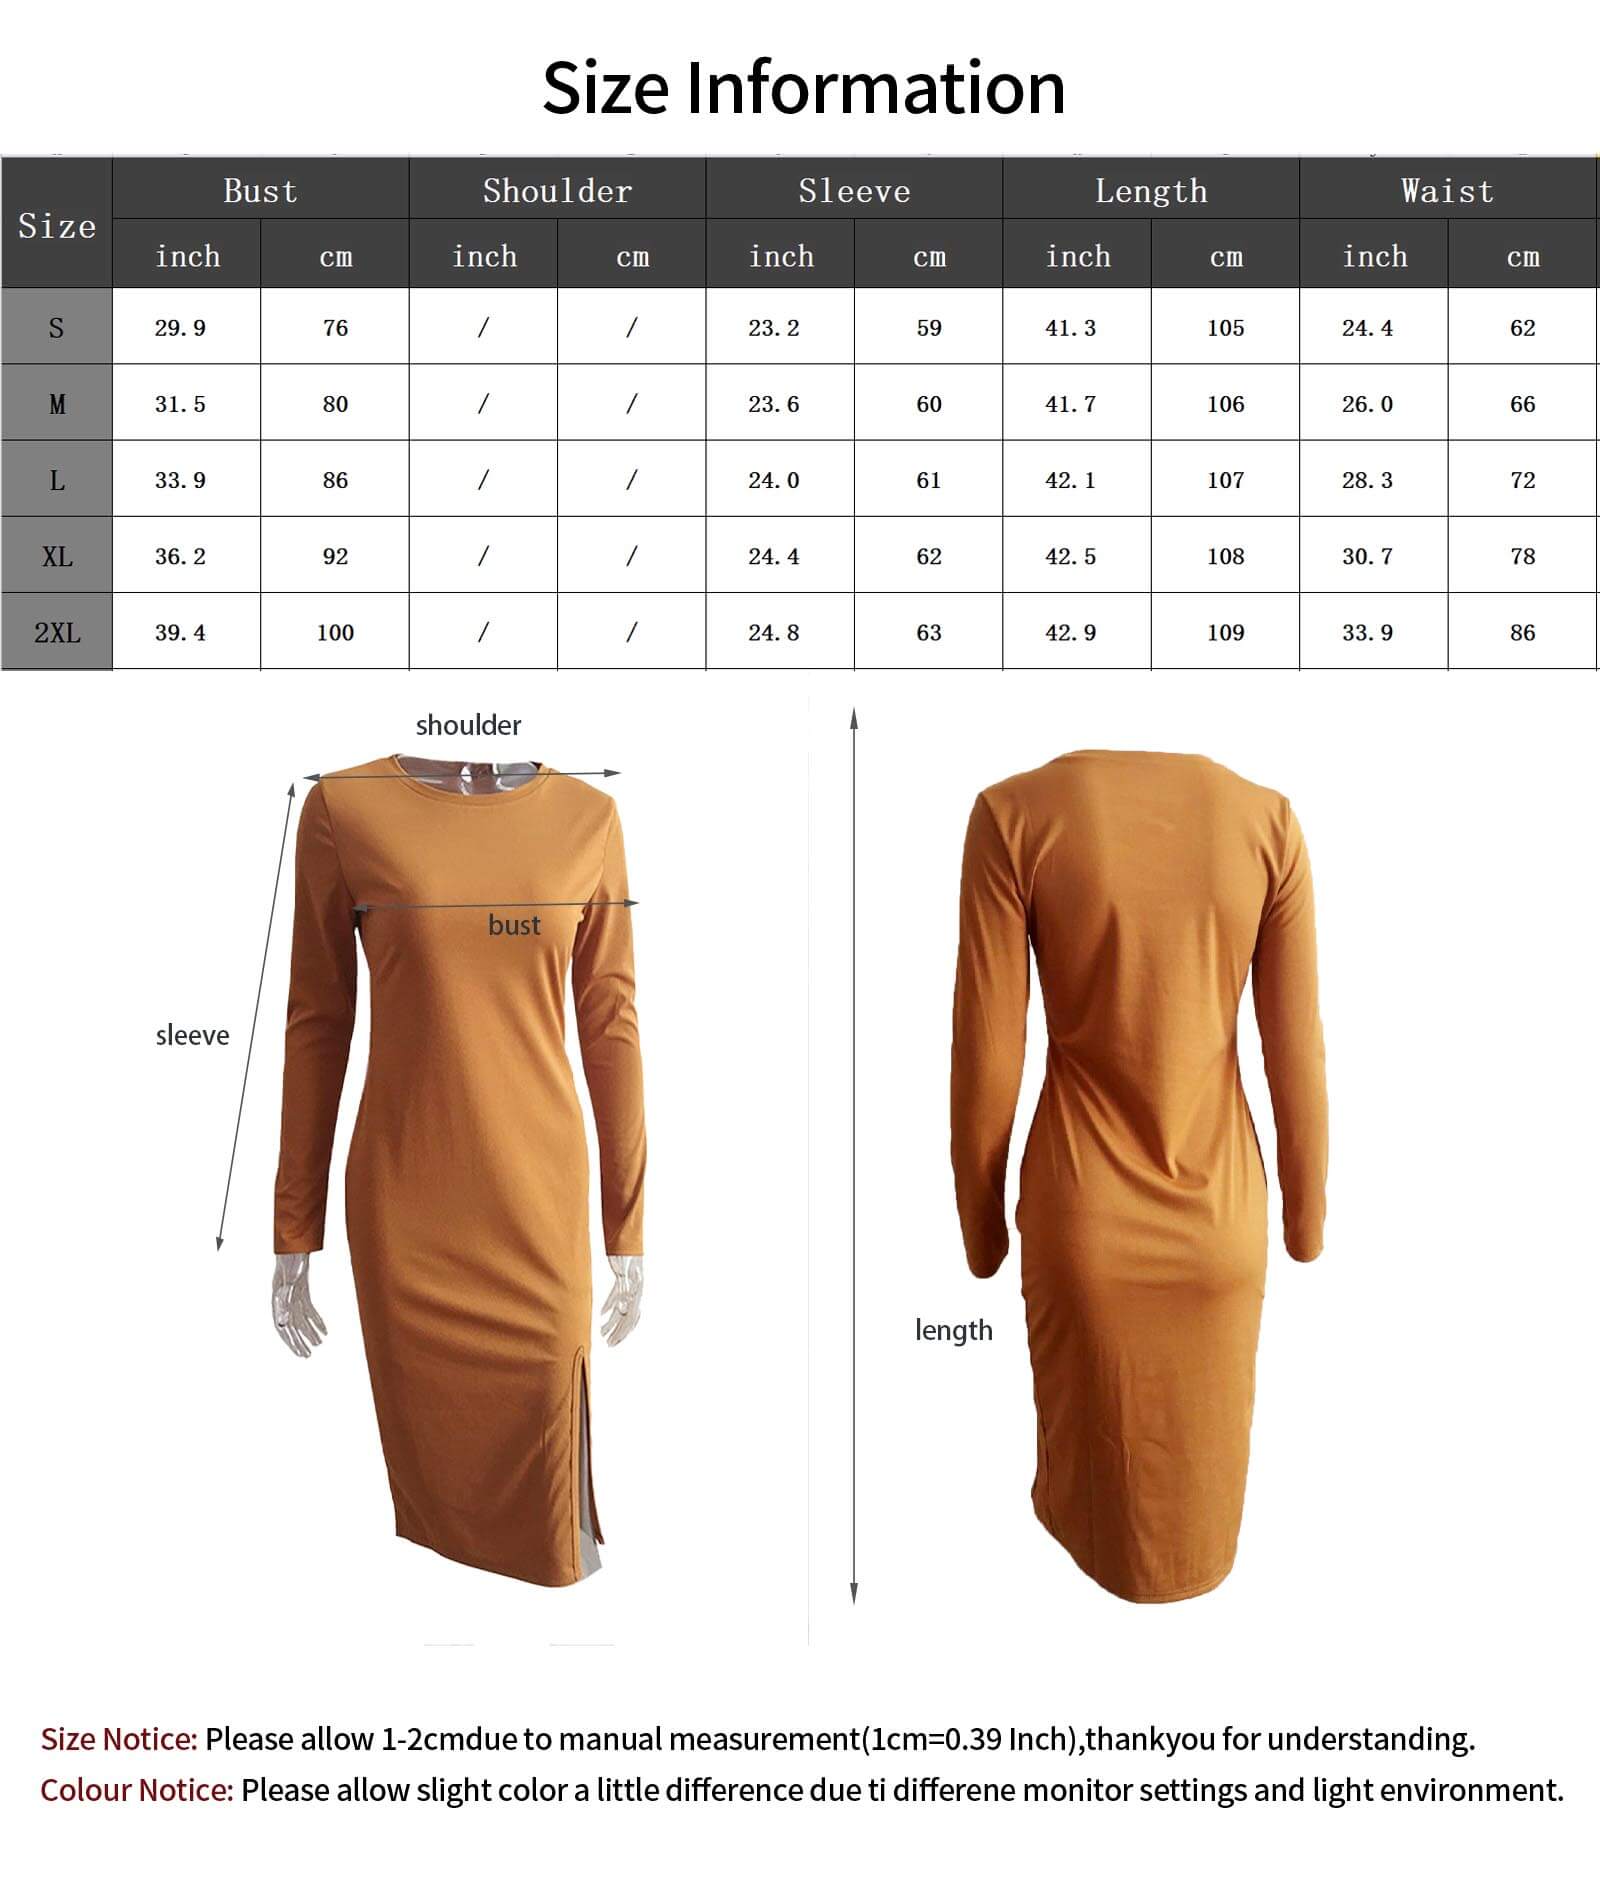  Women's Sexy Open Front Split Long Sleeve Tight Dresses Slim Fit Cocktail Evening Party Round Neck Shirt Pencial Dress